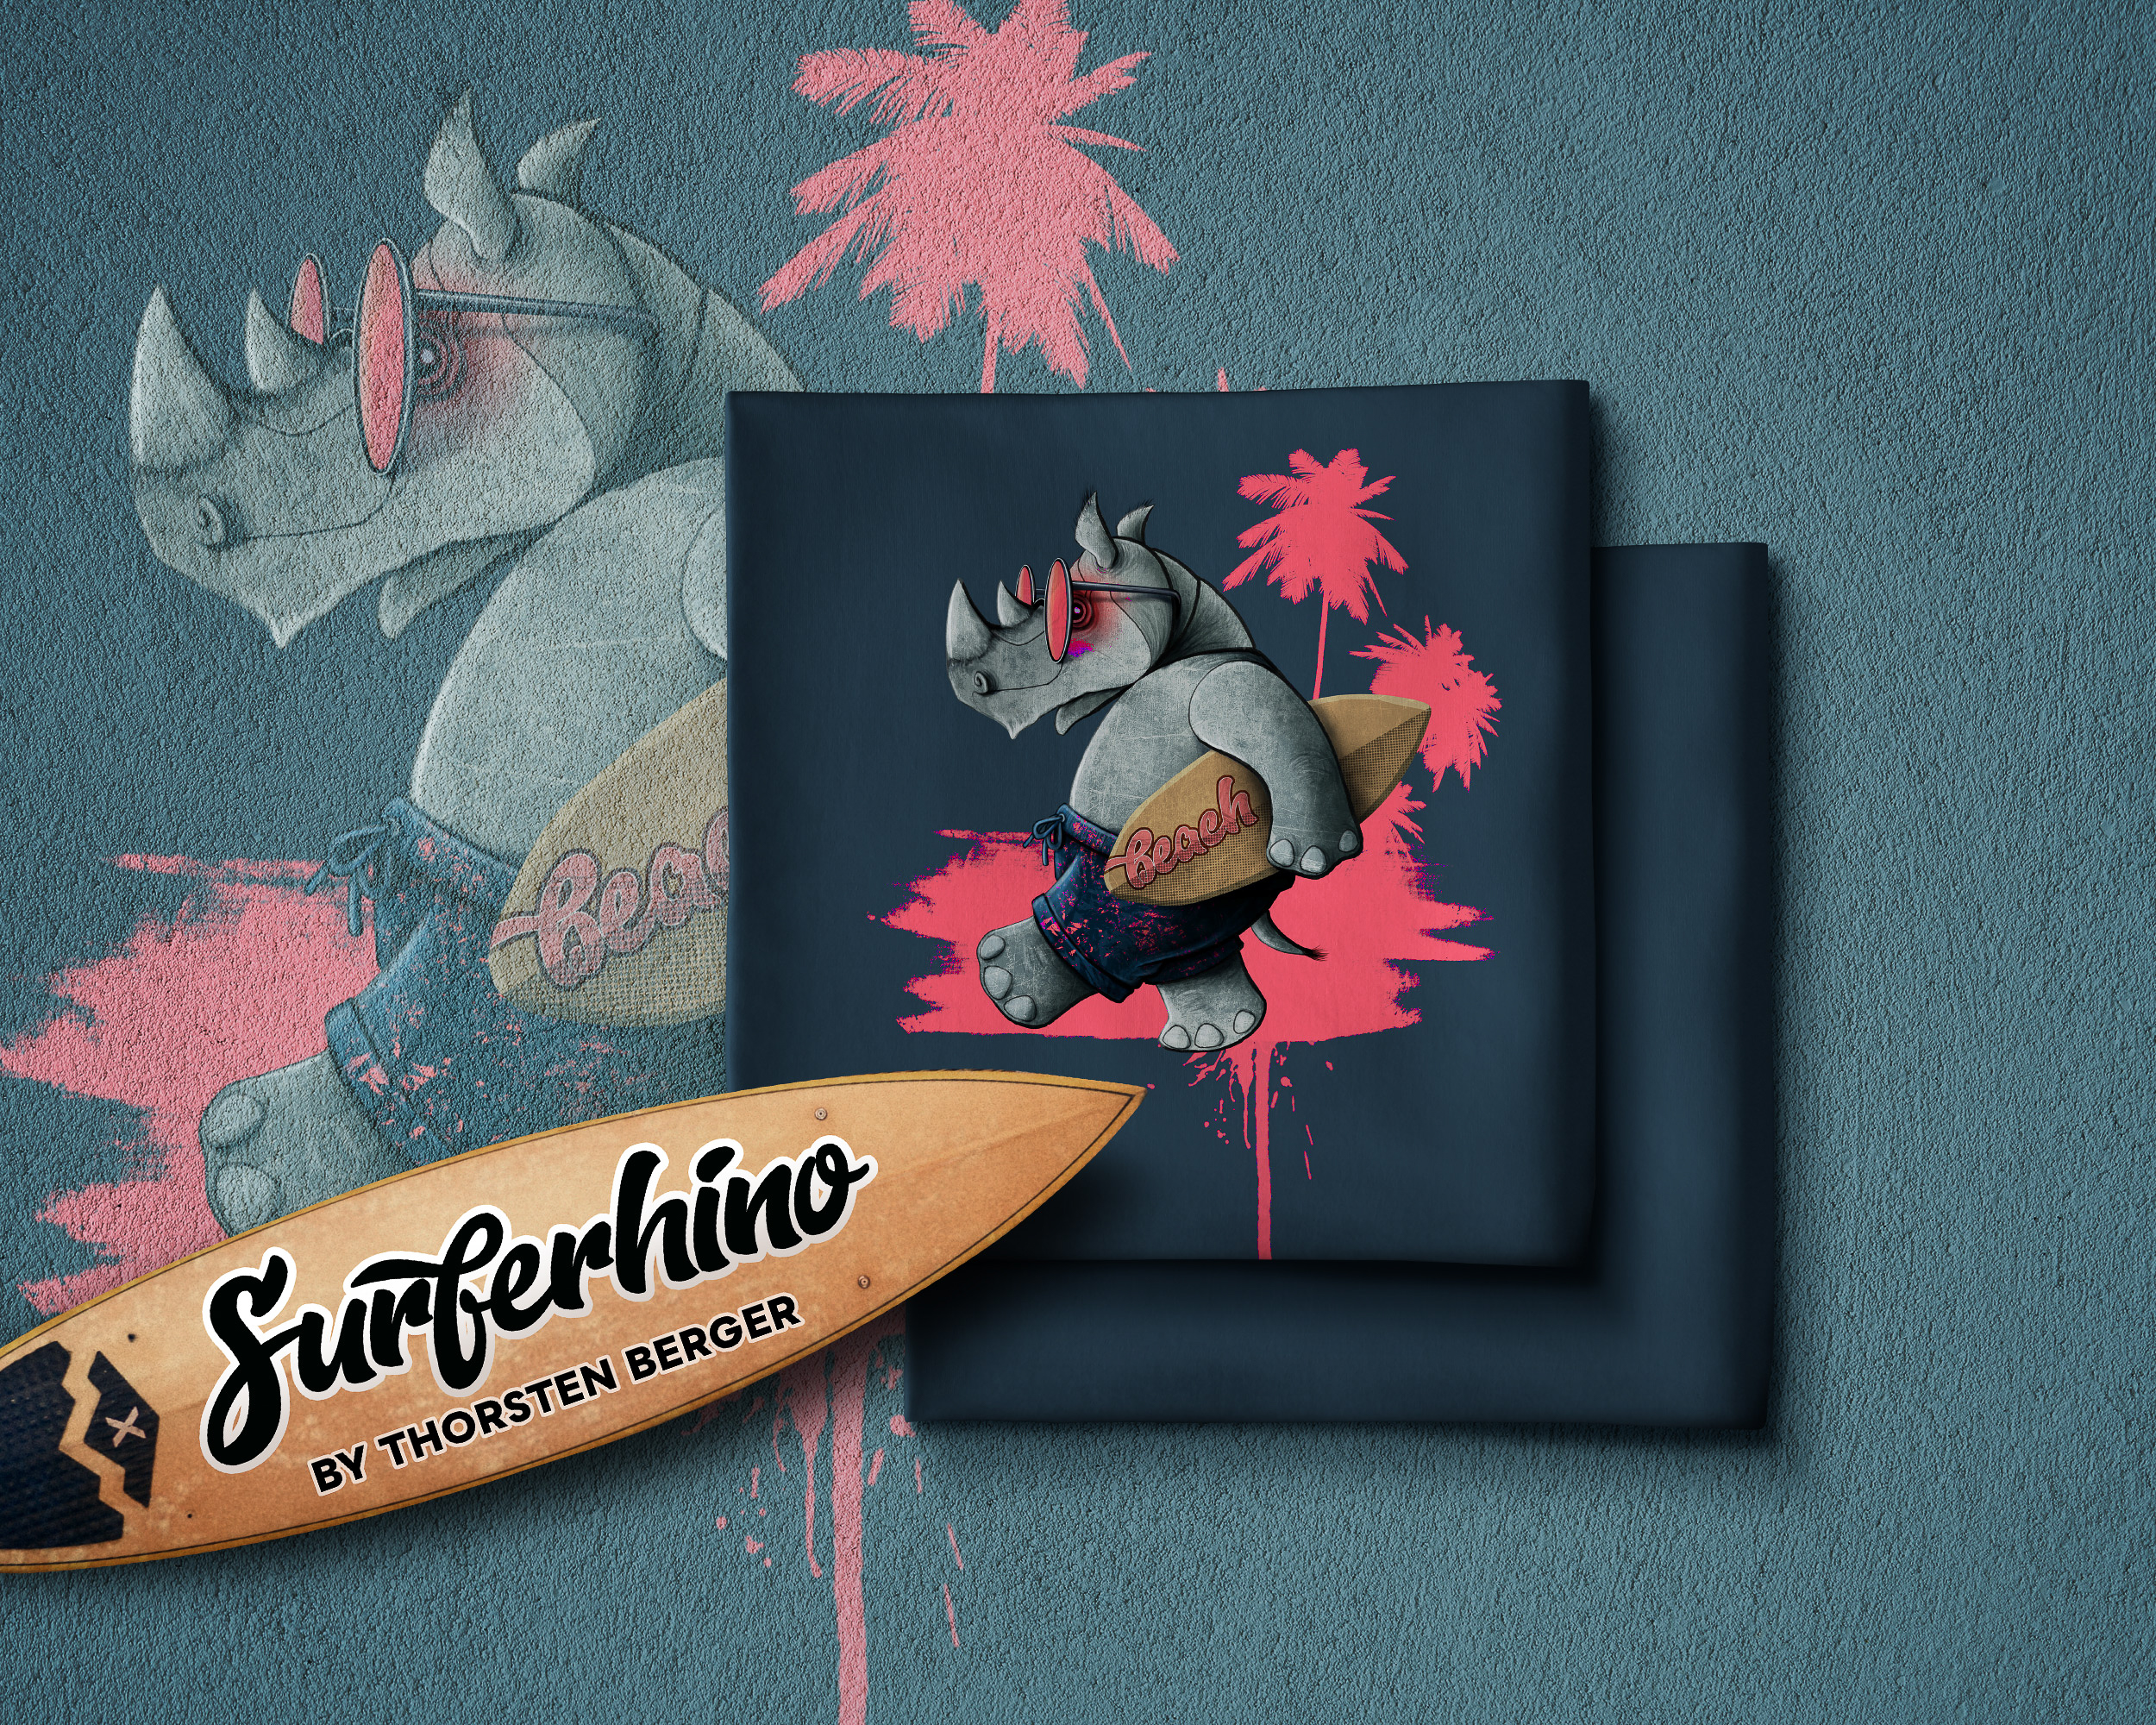 Panel Surferhino Oscar Navy - Flame by Thorsten Berger  